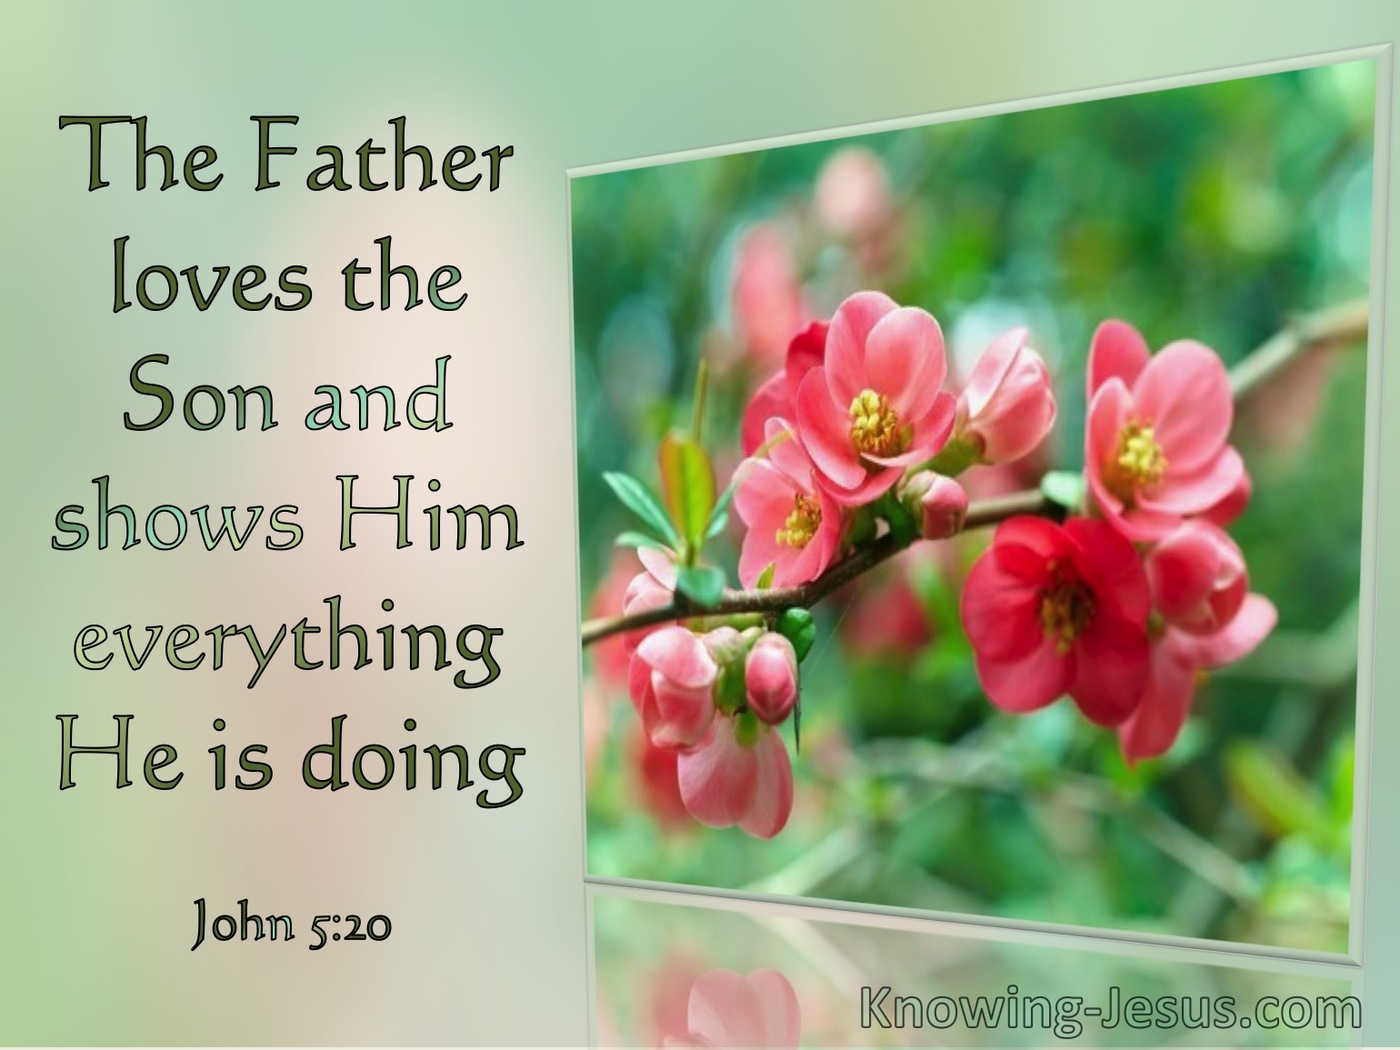 John 5:20 The Father Loves The Son And Shows Him Everything (windows)01:14